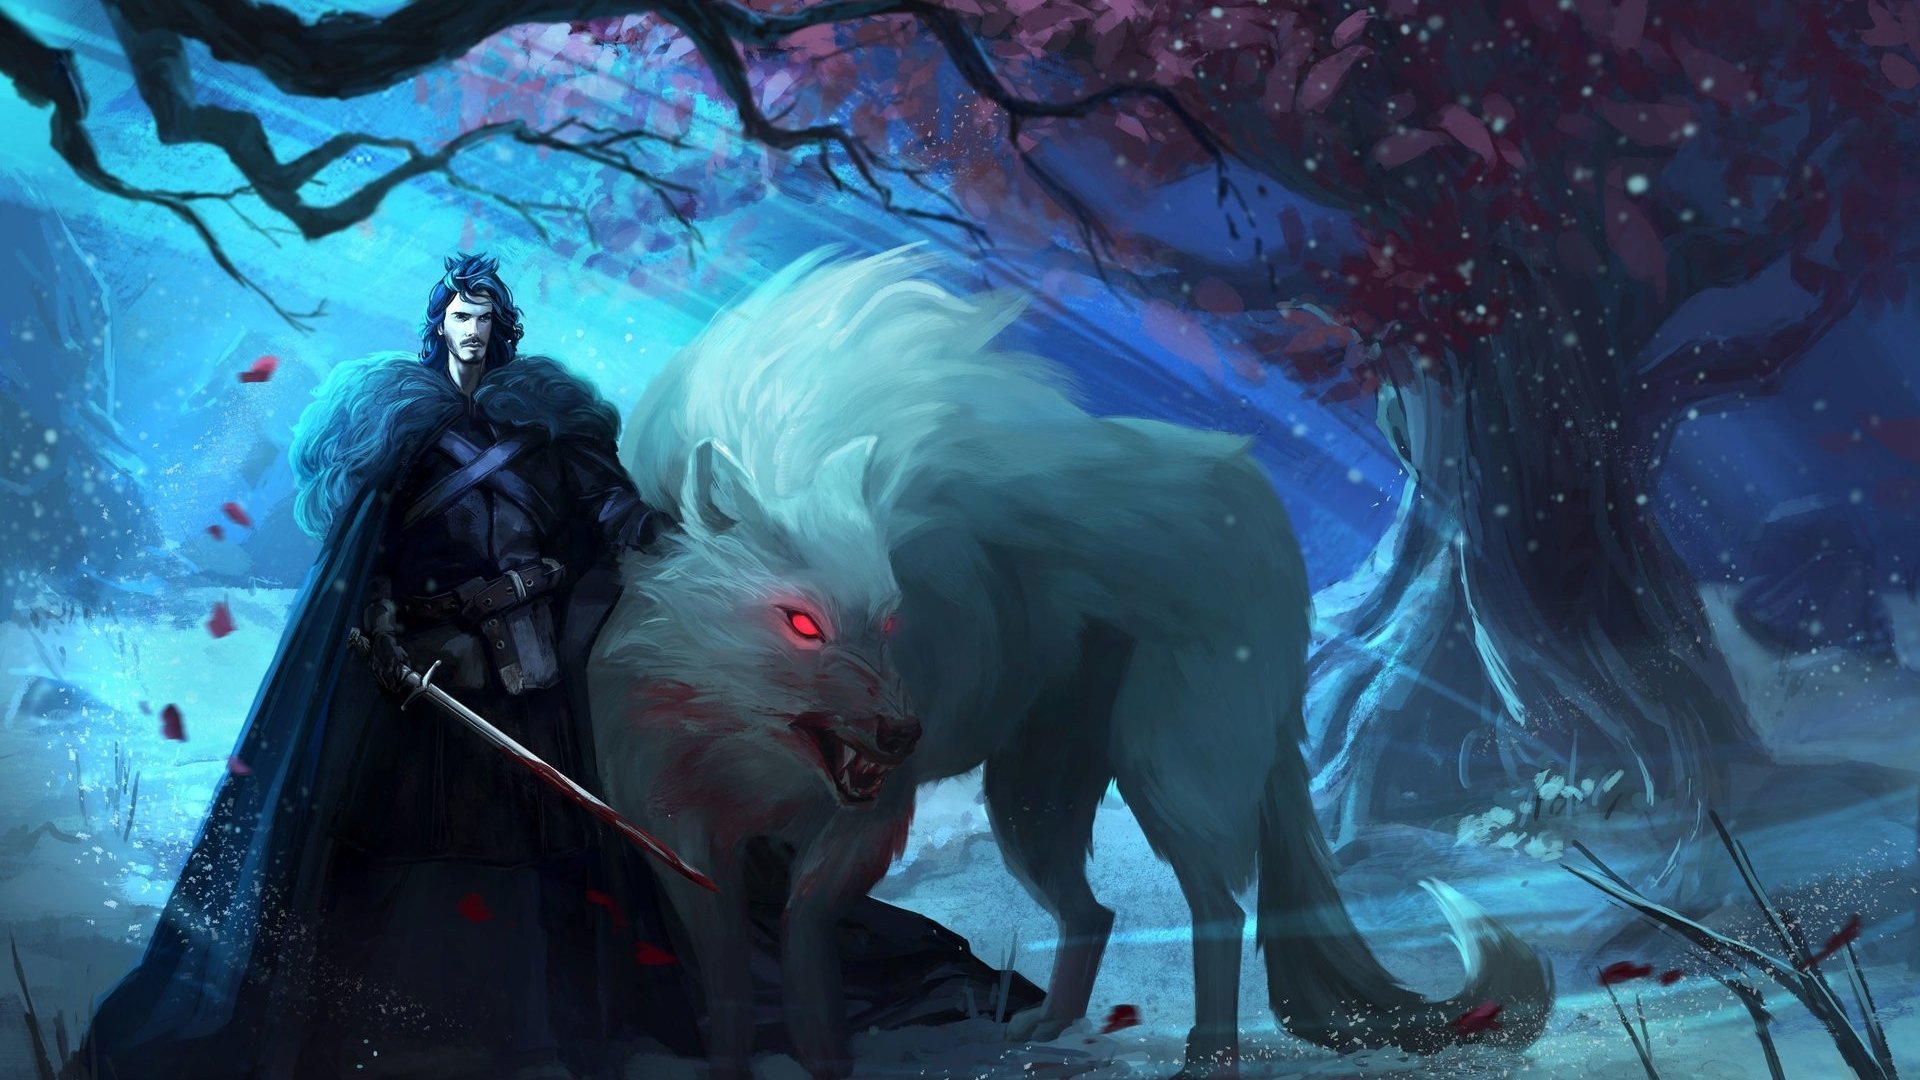 Jon Snow and Ghost HD Wallpaper Background Image 1920x1080 1920x1080